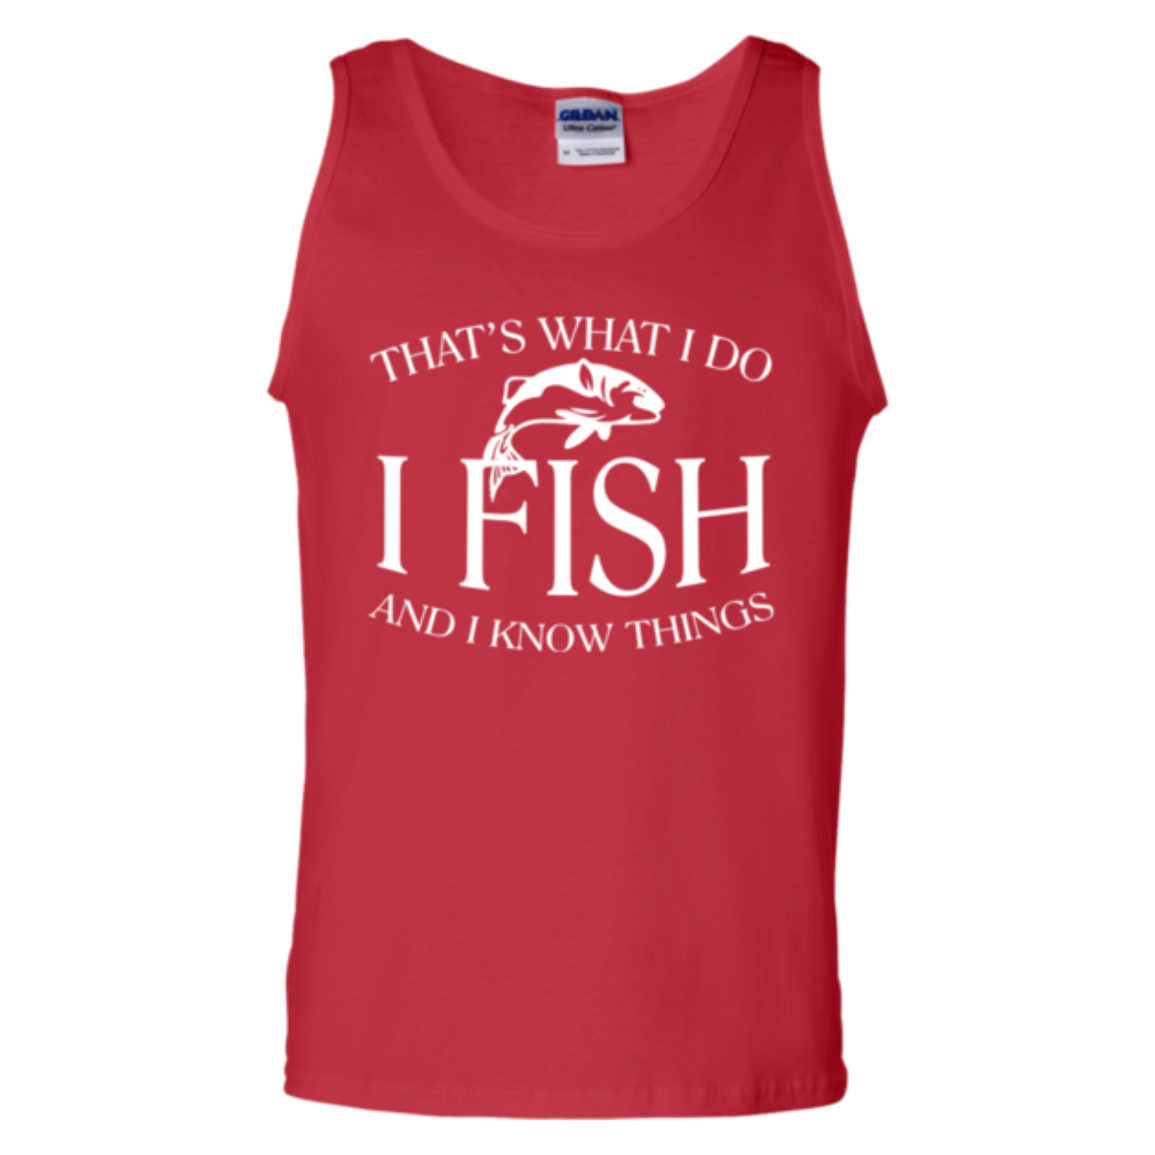 That's what i do i fish and i know things tank top red b